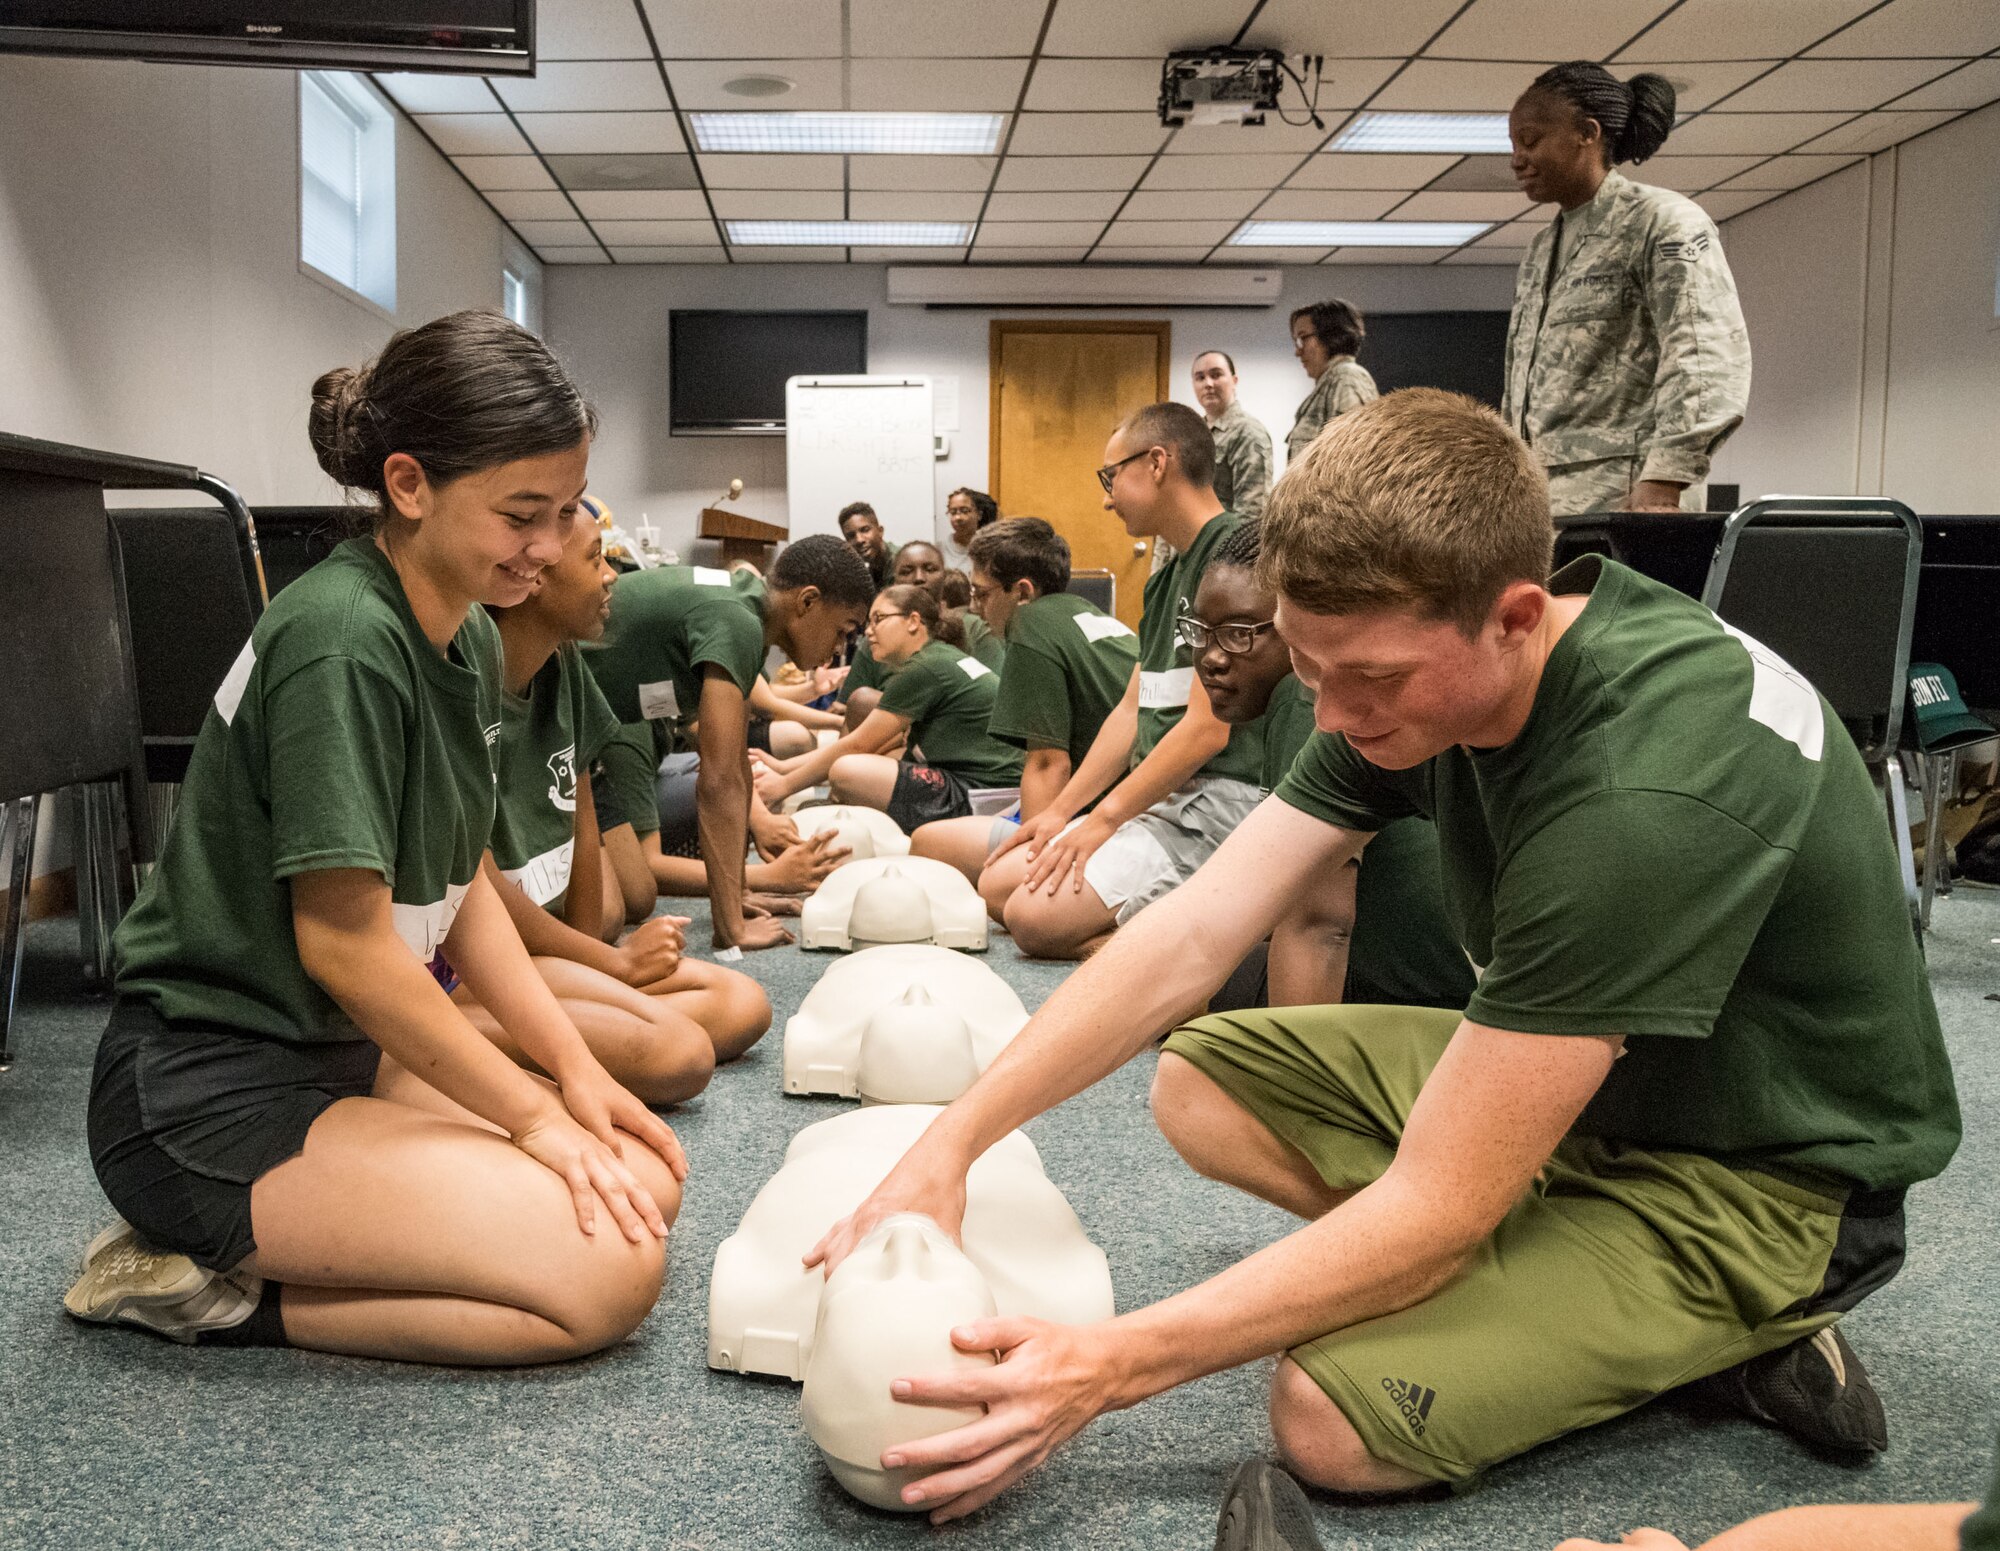 Air Force Junior Reserve Officers’ Training Corps cadets Erica Voss, left, and Trenton Reed, right, of Dragon Flight take turns practicing CPR June 19, 2019, at the Delaware National Guard Bethany Beach Training Site, Bethany Beach, Del. Three members from the 436th Medical Group, Dover Air Force Base, Del., provided basic CPR training to more than 65 cadets during the Cadet Leadership Course. (U.S. Air Force photo by Roland Balik)